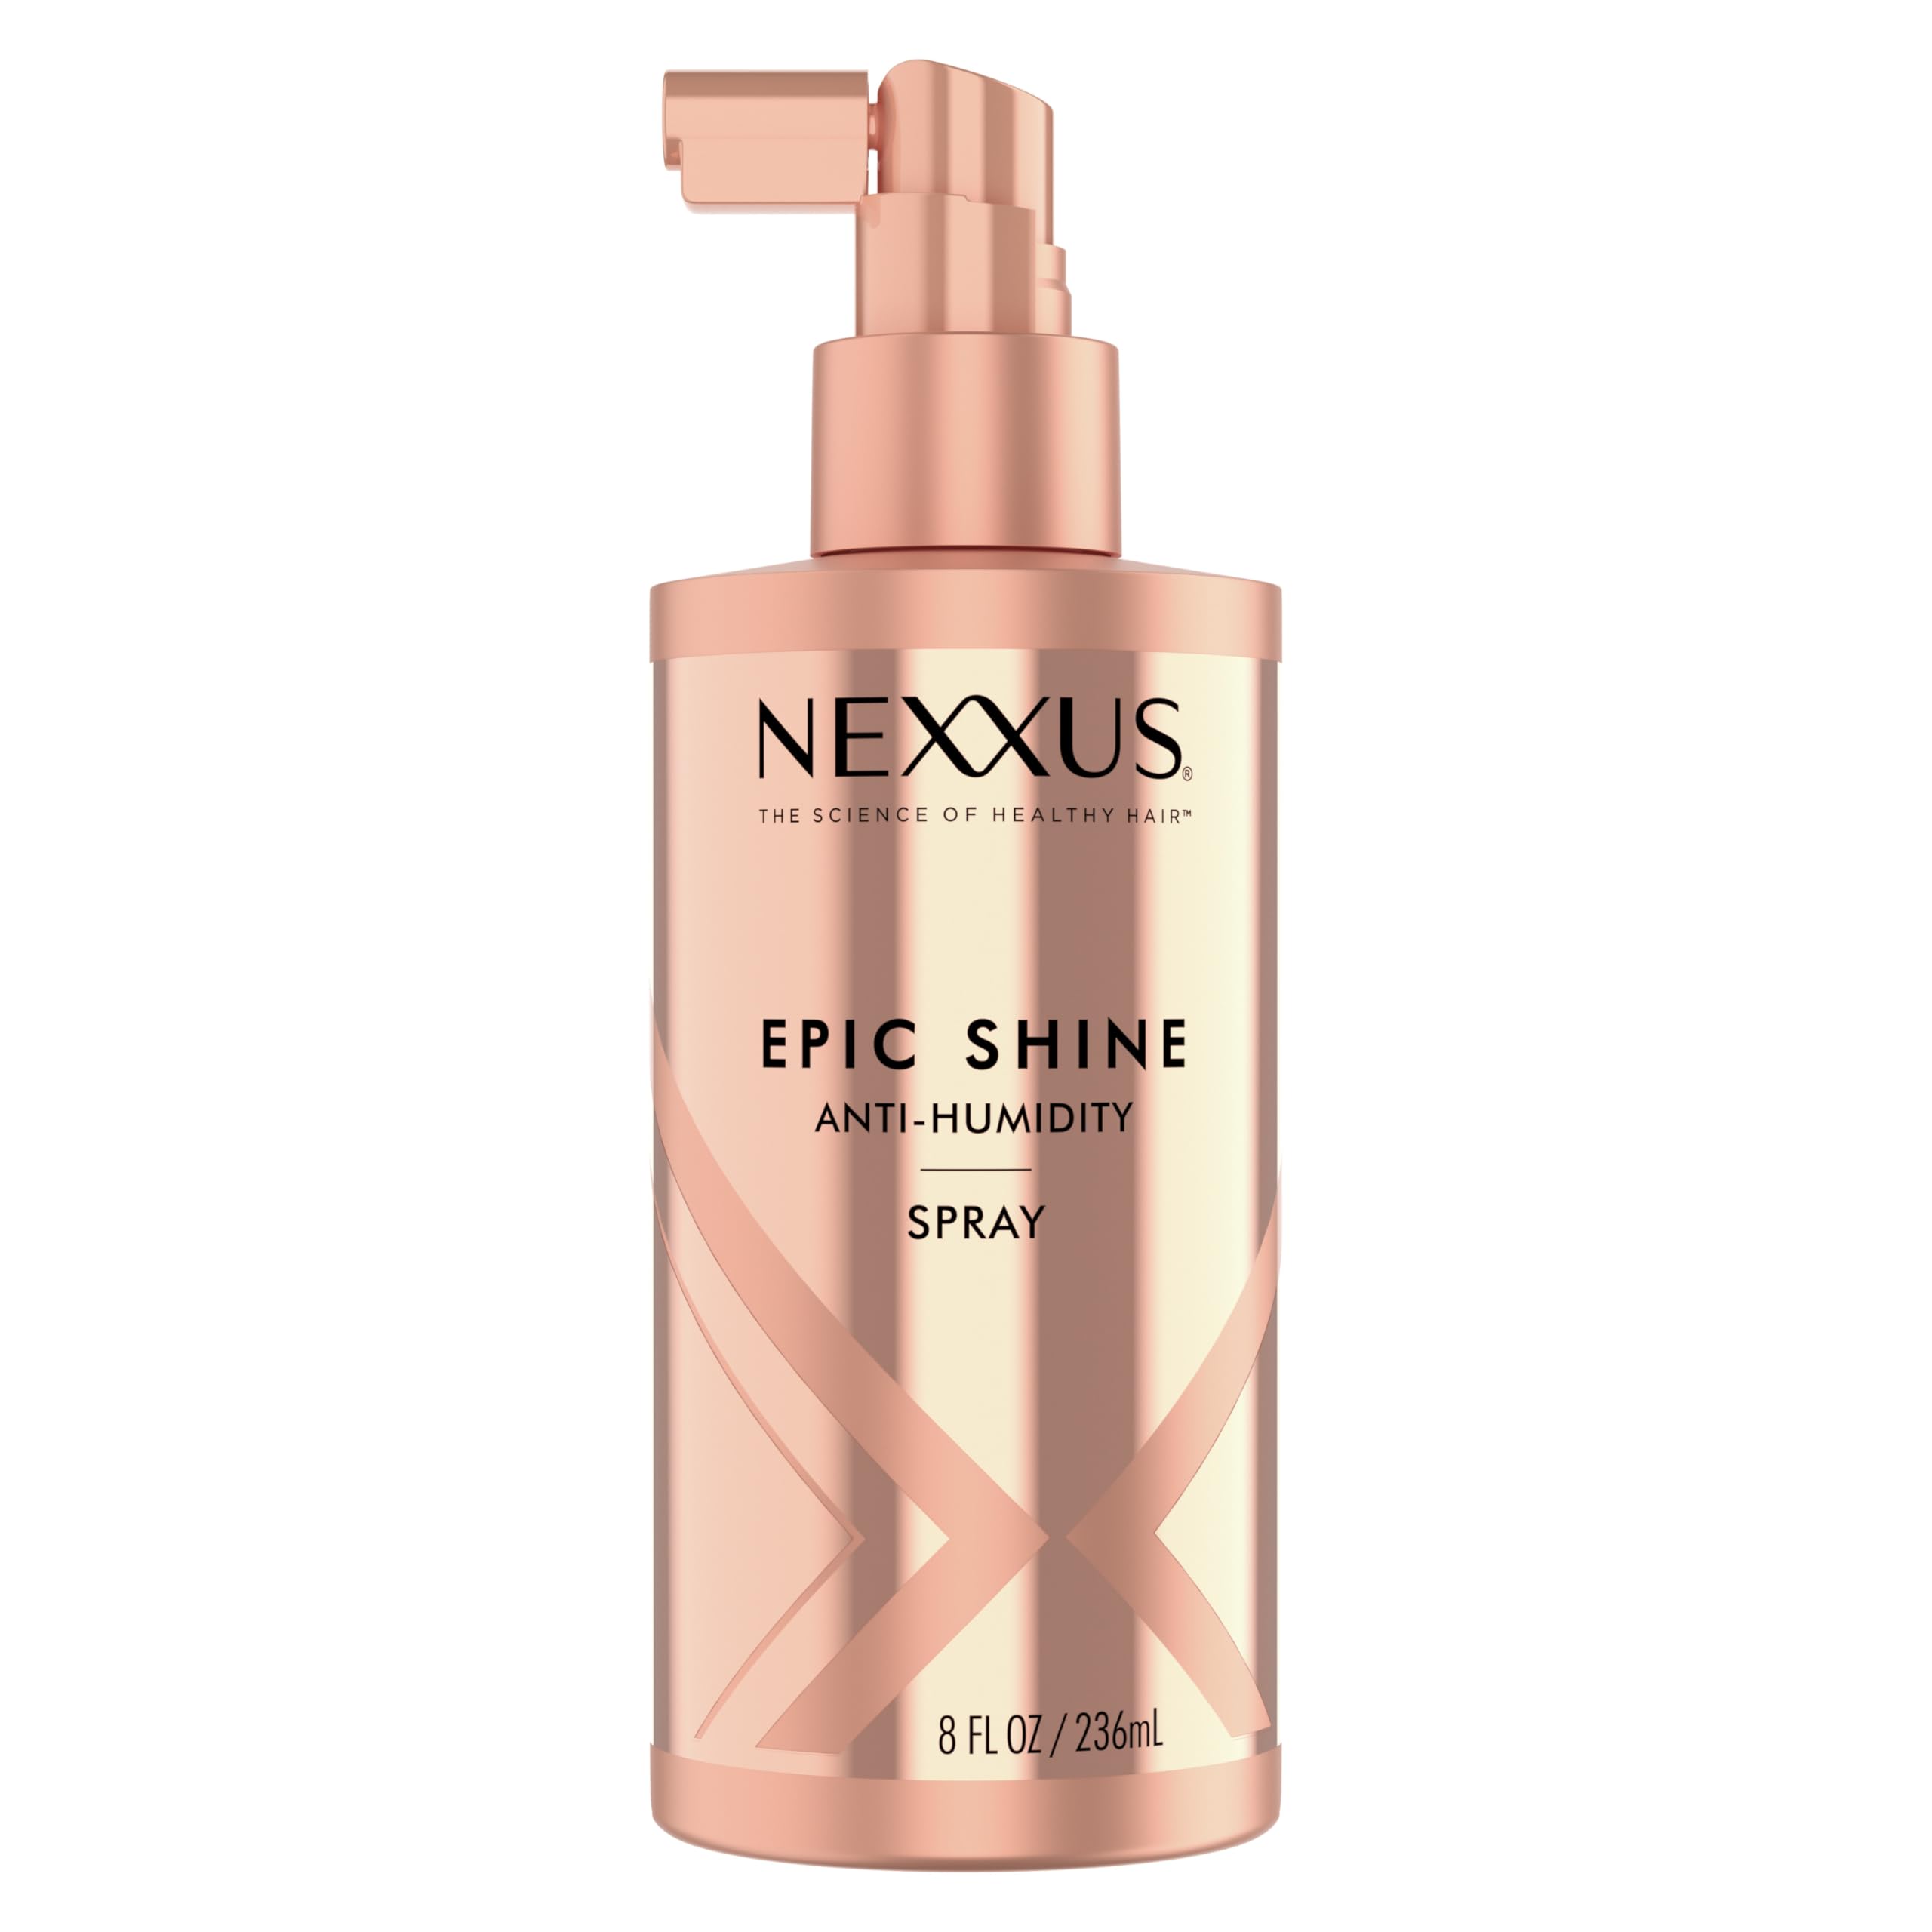 Nexxus Anti-Humidity Spray Epic Shine for Long Lasting, Weightless Shine, with StyleProtect Technology 8 oz